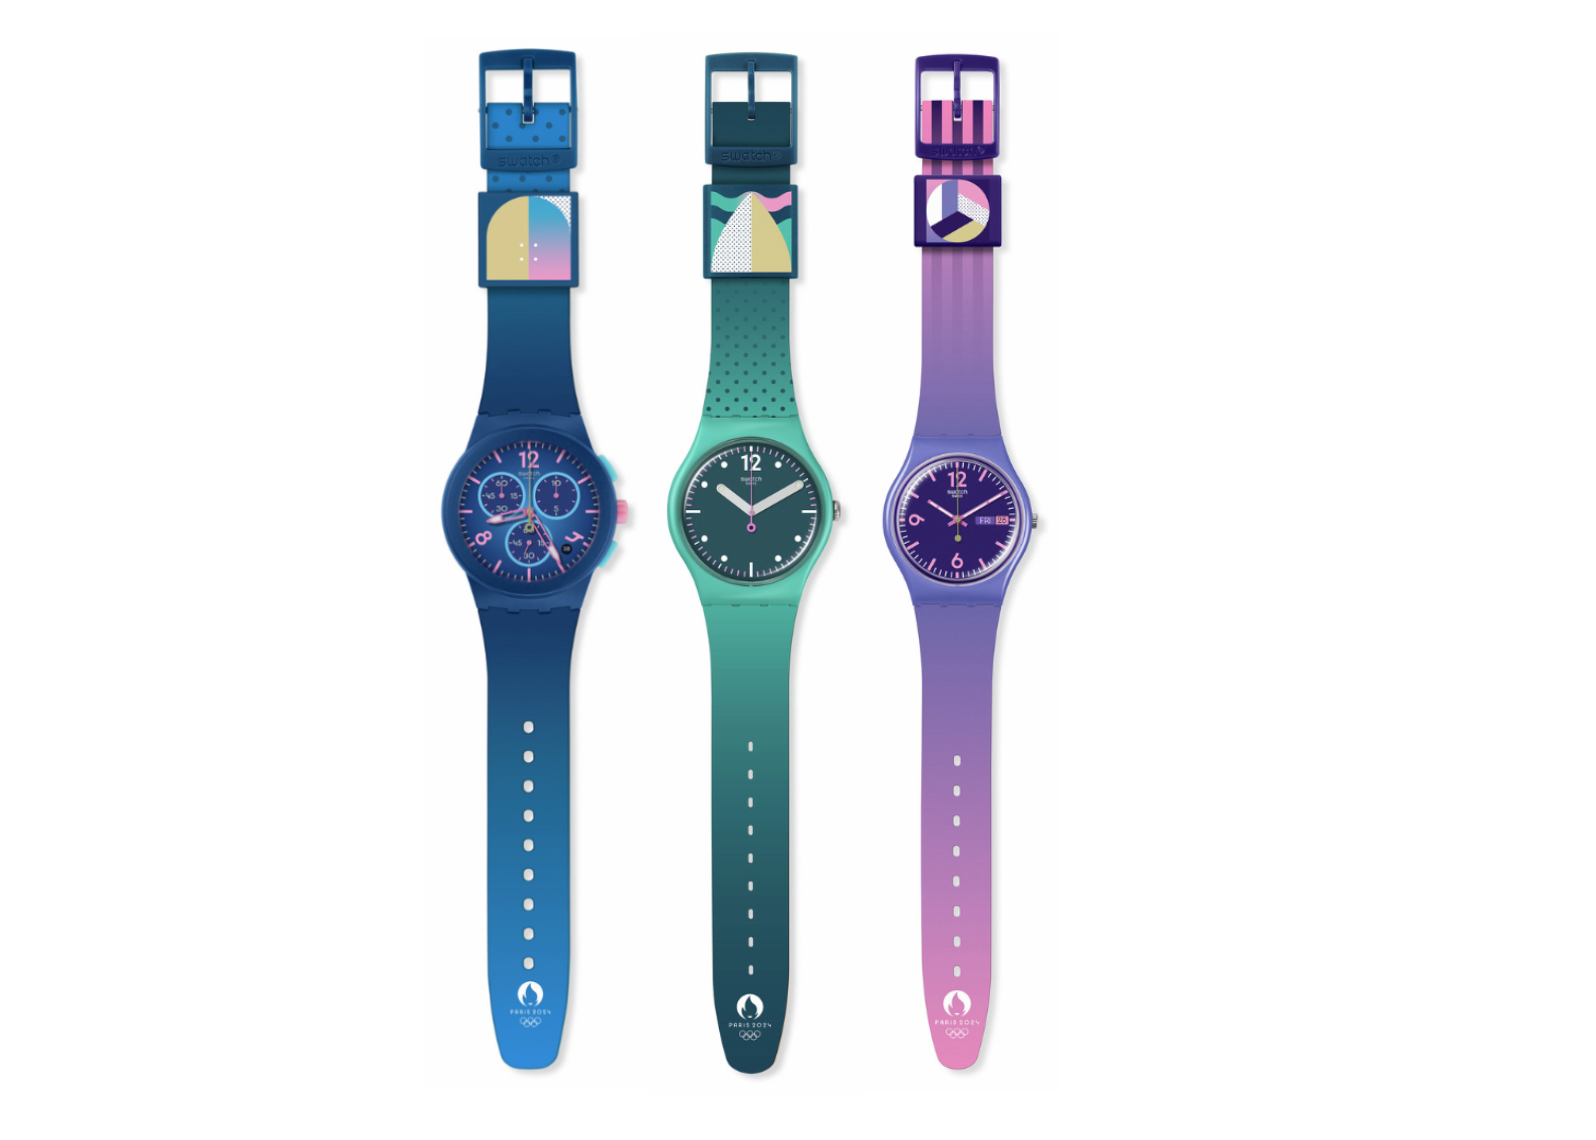 , Swatch Olympic Paris Games 2024 collection celebrates skateboarding, surfing and volleyball